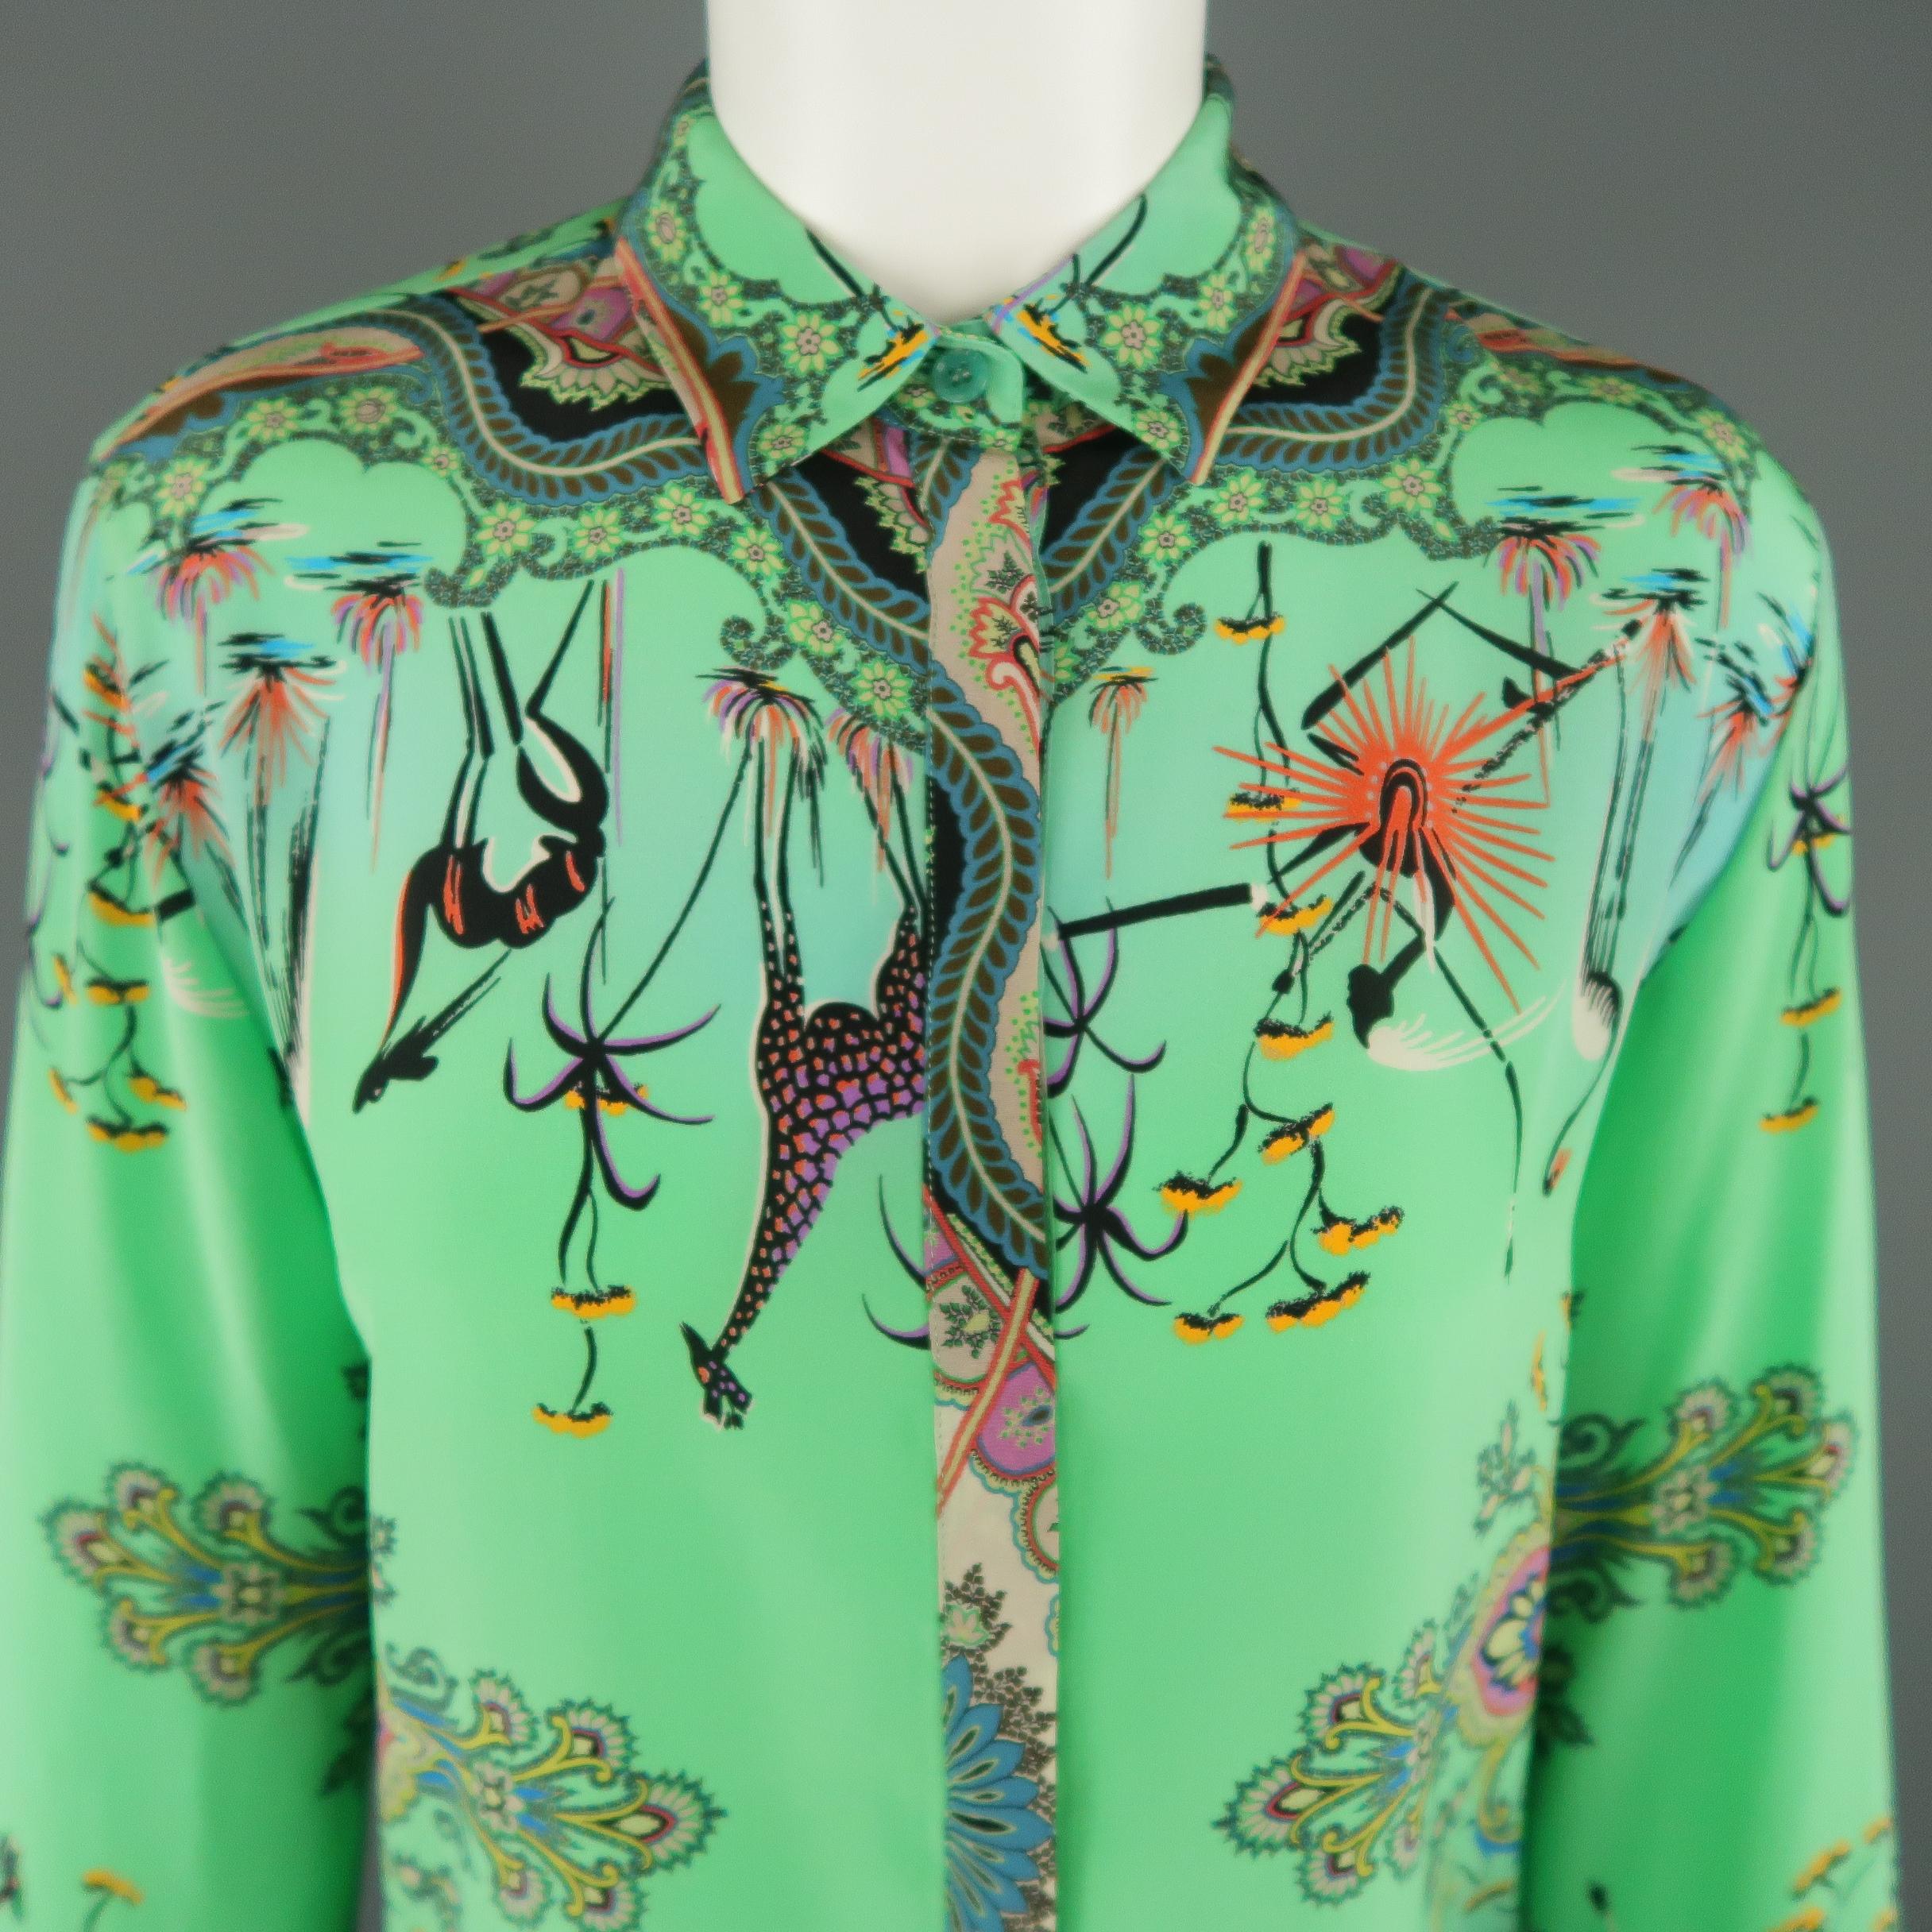 ETRO blouse comes in turquoise silk with a paisley bird print throughout, pointed collar, and hidden placket button closure. Made in Italy.
 
Excellent Pre-Owned Condition. Retails: $1,060.00.
Marked: IT 42
 
Measurements:
 
Shoulder: 15 in.
Chest: